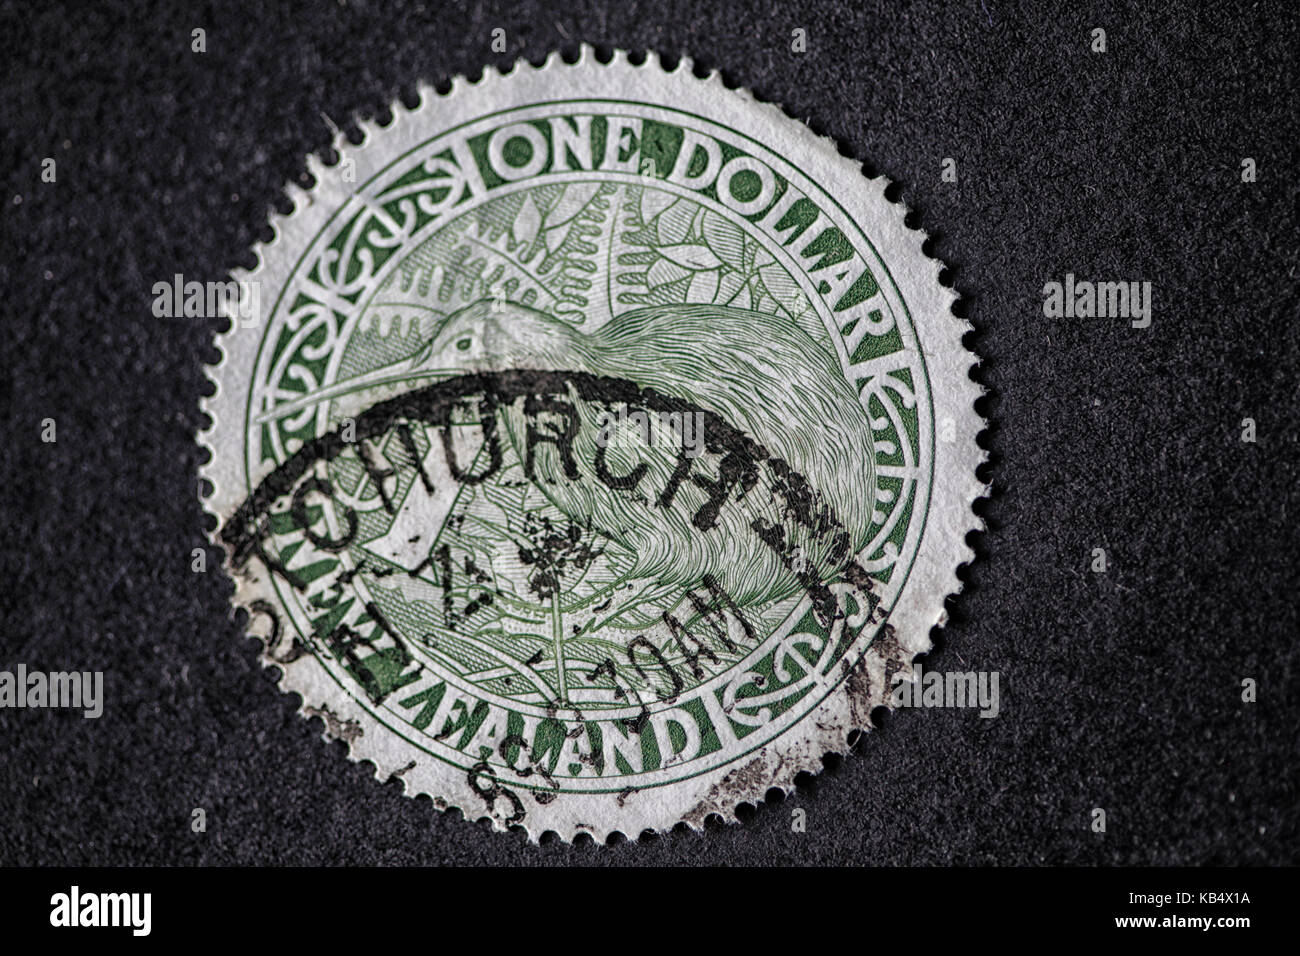 International Stamps Collectibles Stock Photo - Download Image Now